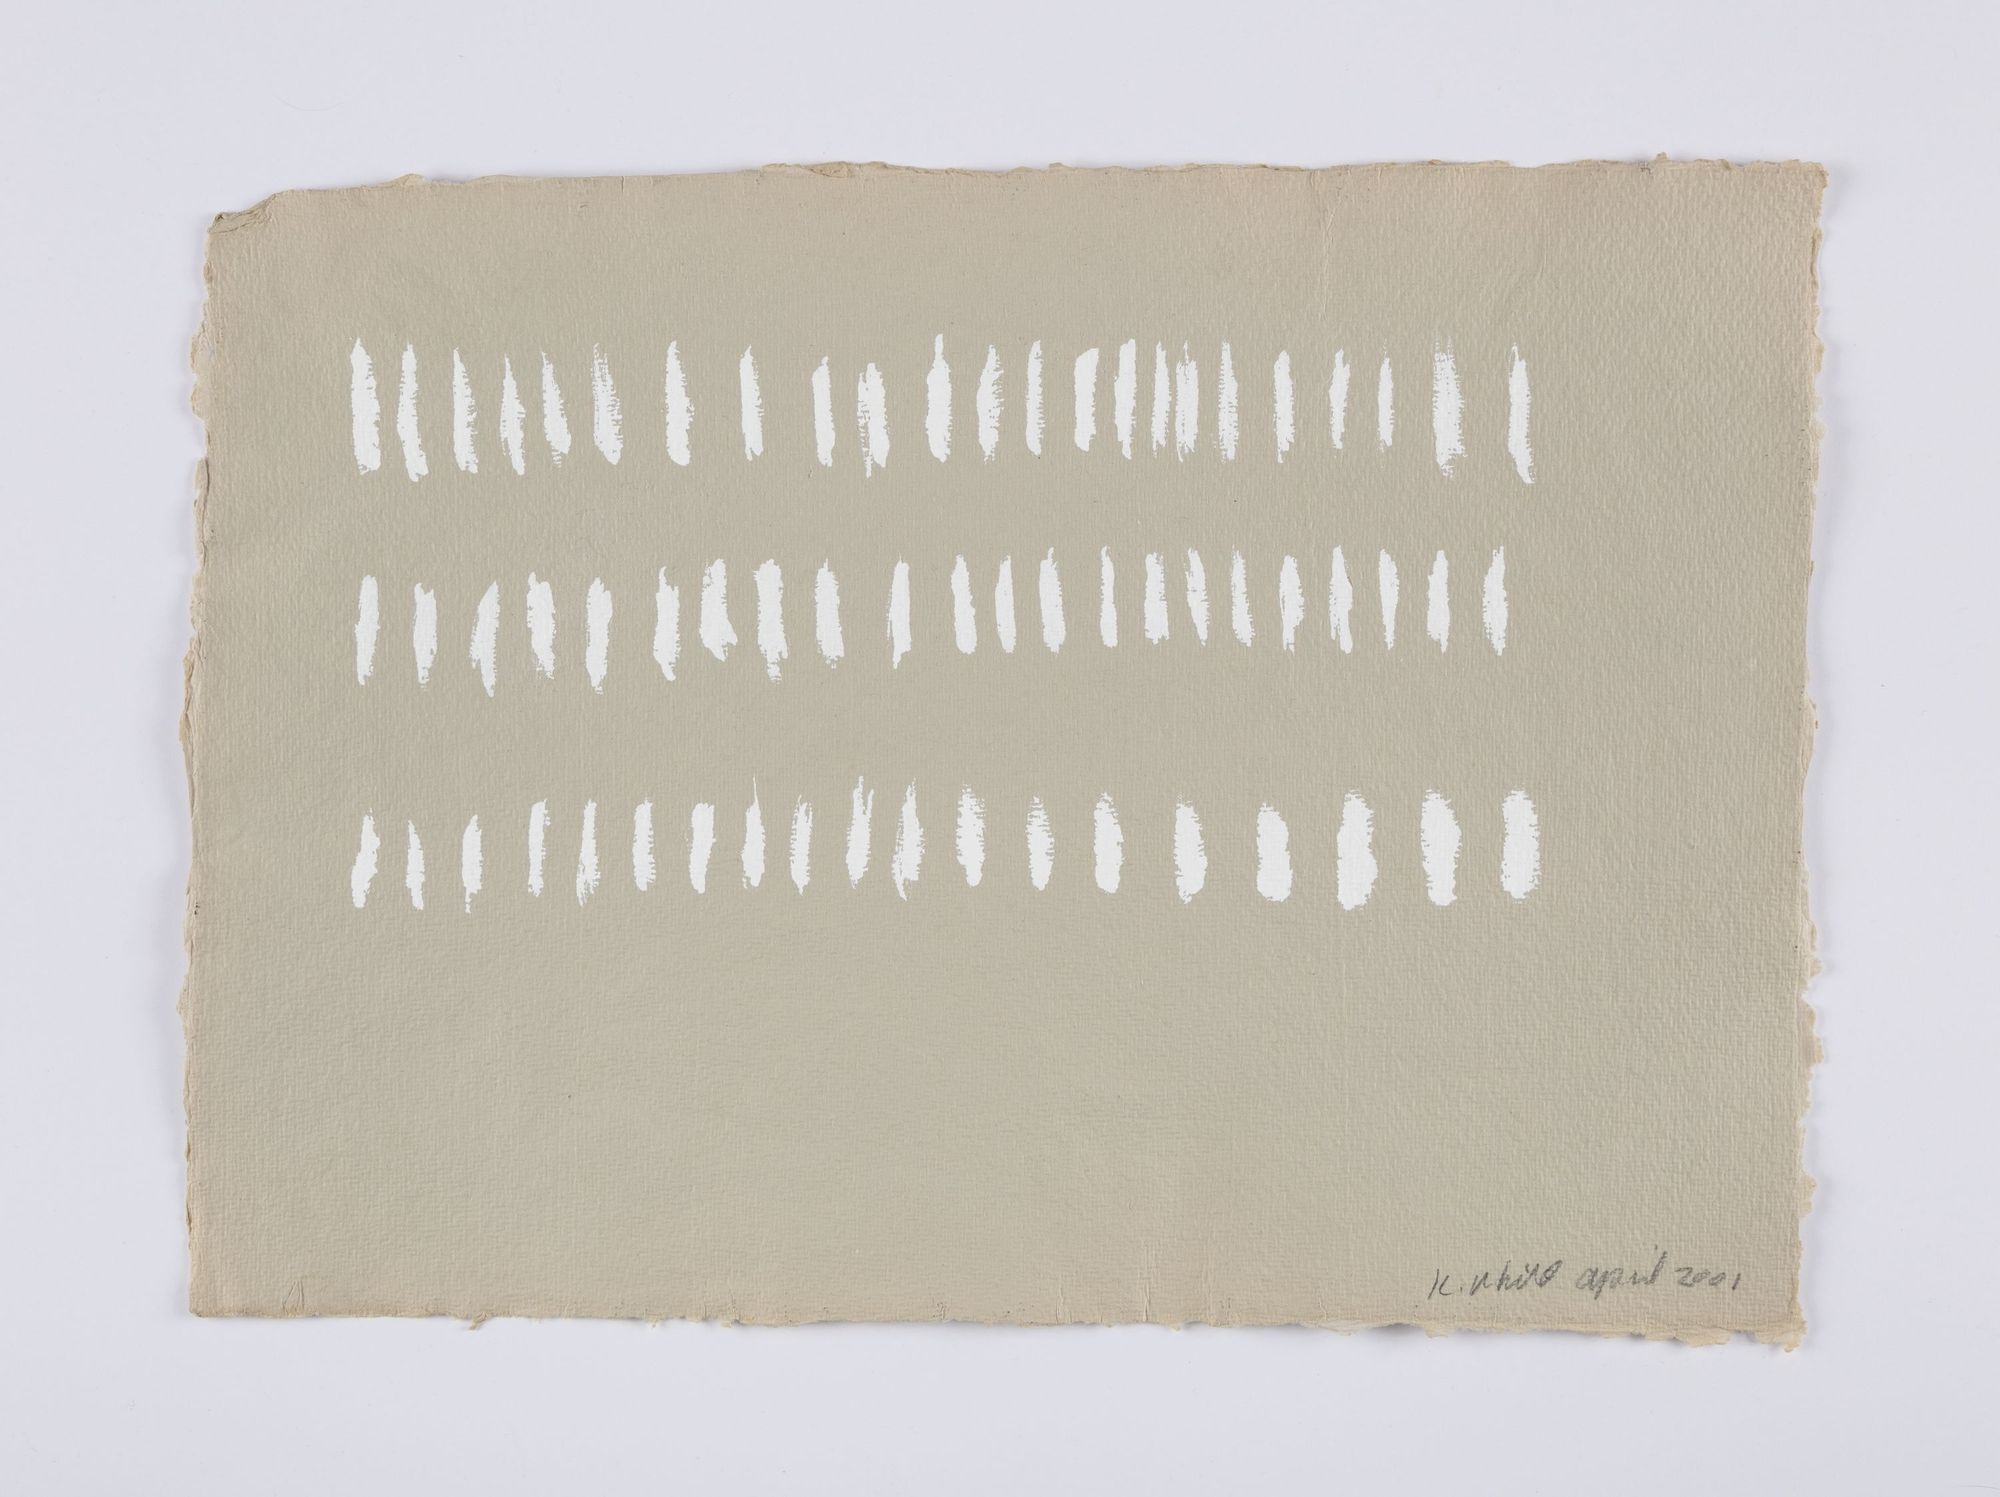 A view of one of the Year of Firsts works, a beige paper with white hash marks in three rows 